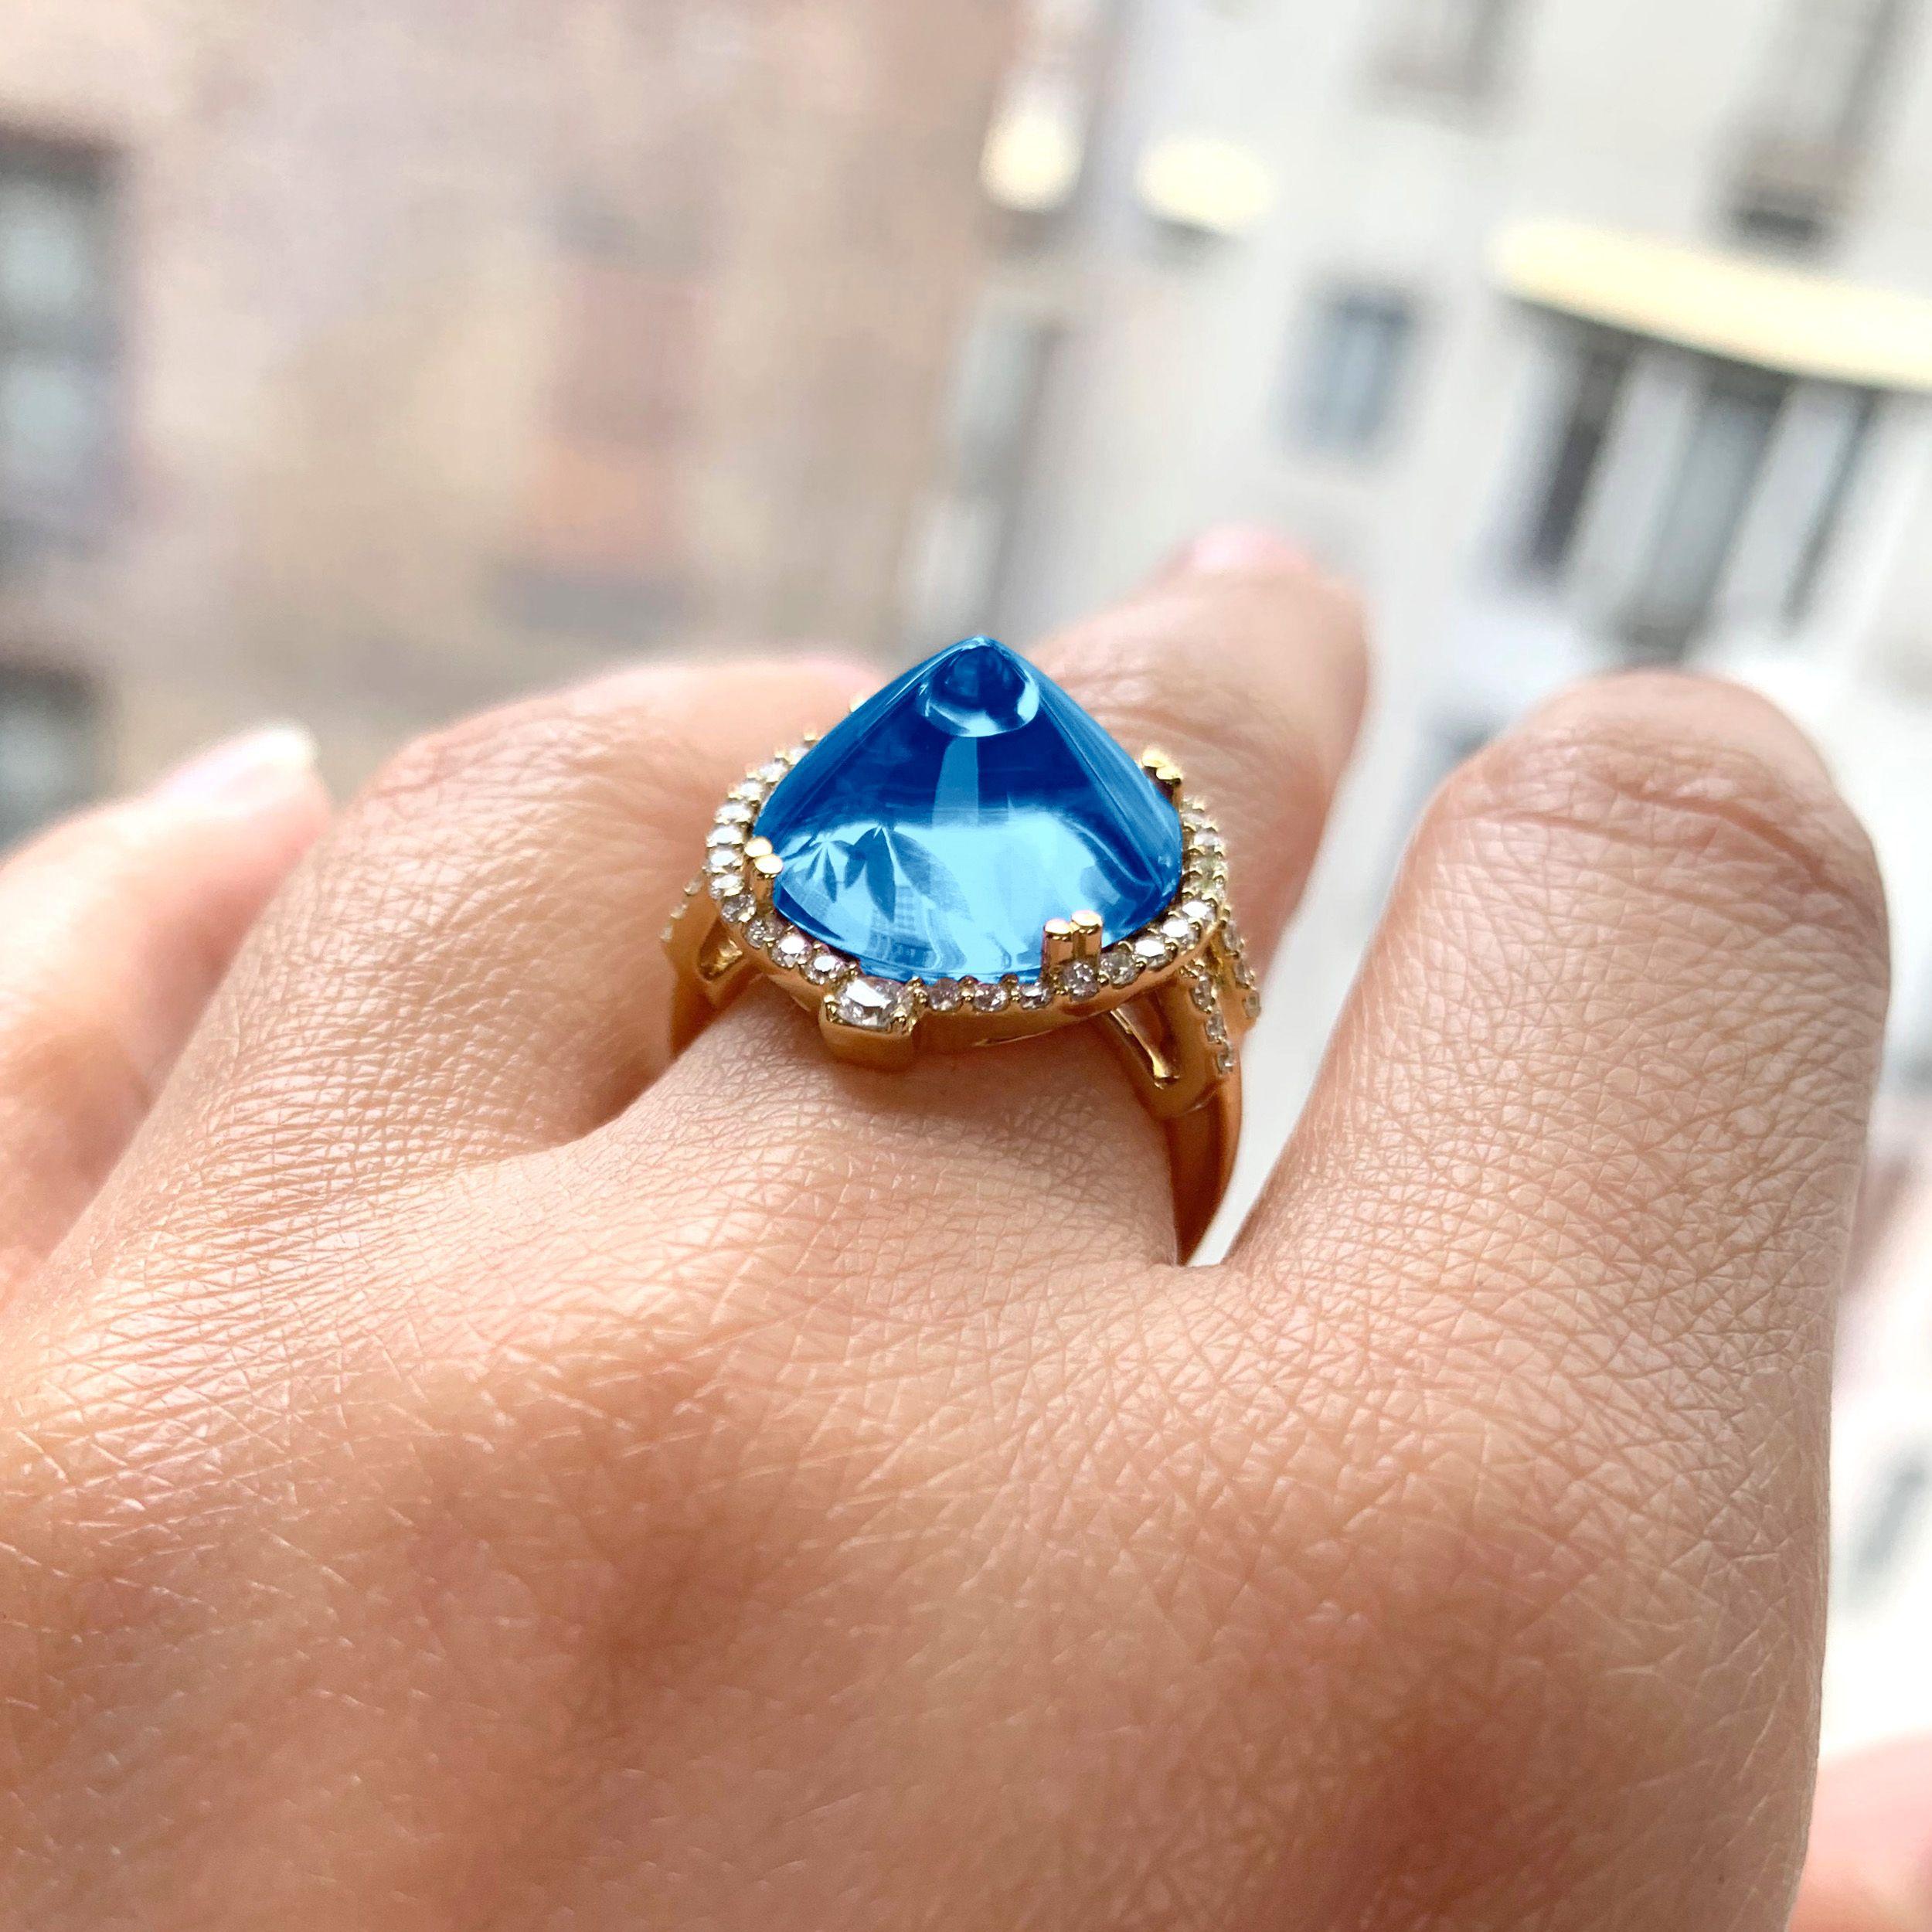 London Blue Topaz Sugar Loaf Ring with Diamonds in 18K Yellow Gold, from 'Rock 'N Roll' Collection.    Extensive collection of big and bold pieces. Like the music, this Rock ‘n Roll collection is electric in color and very stimulating to the eye.